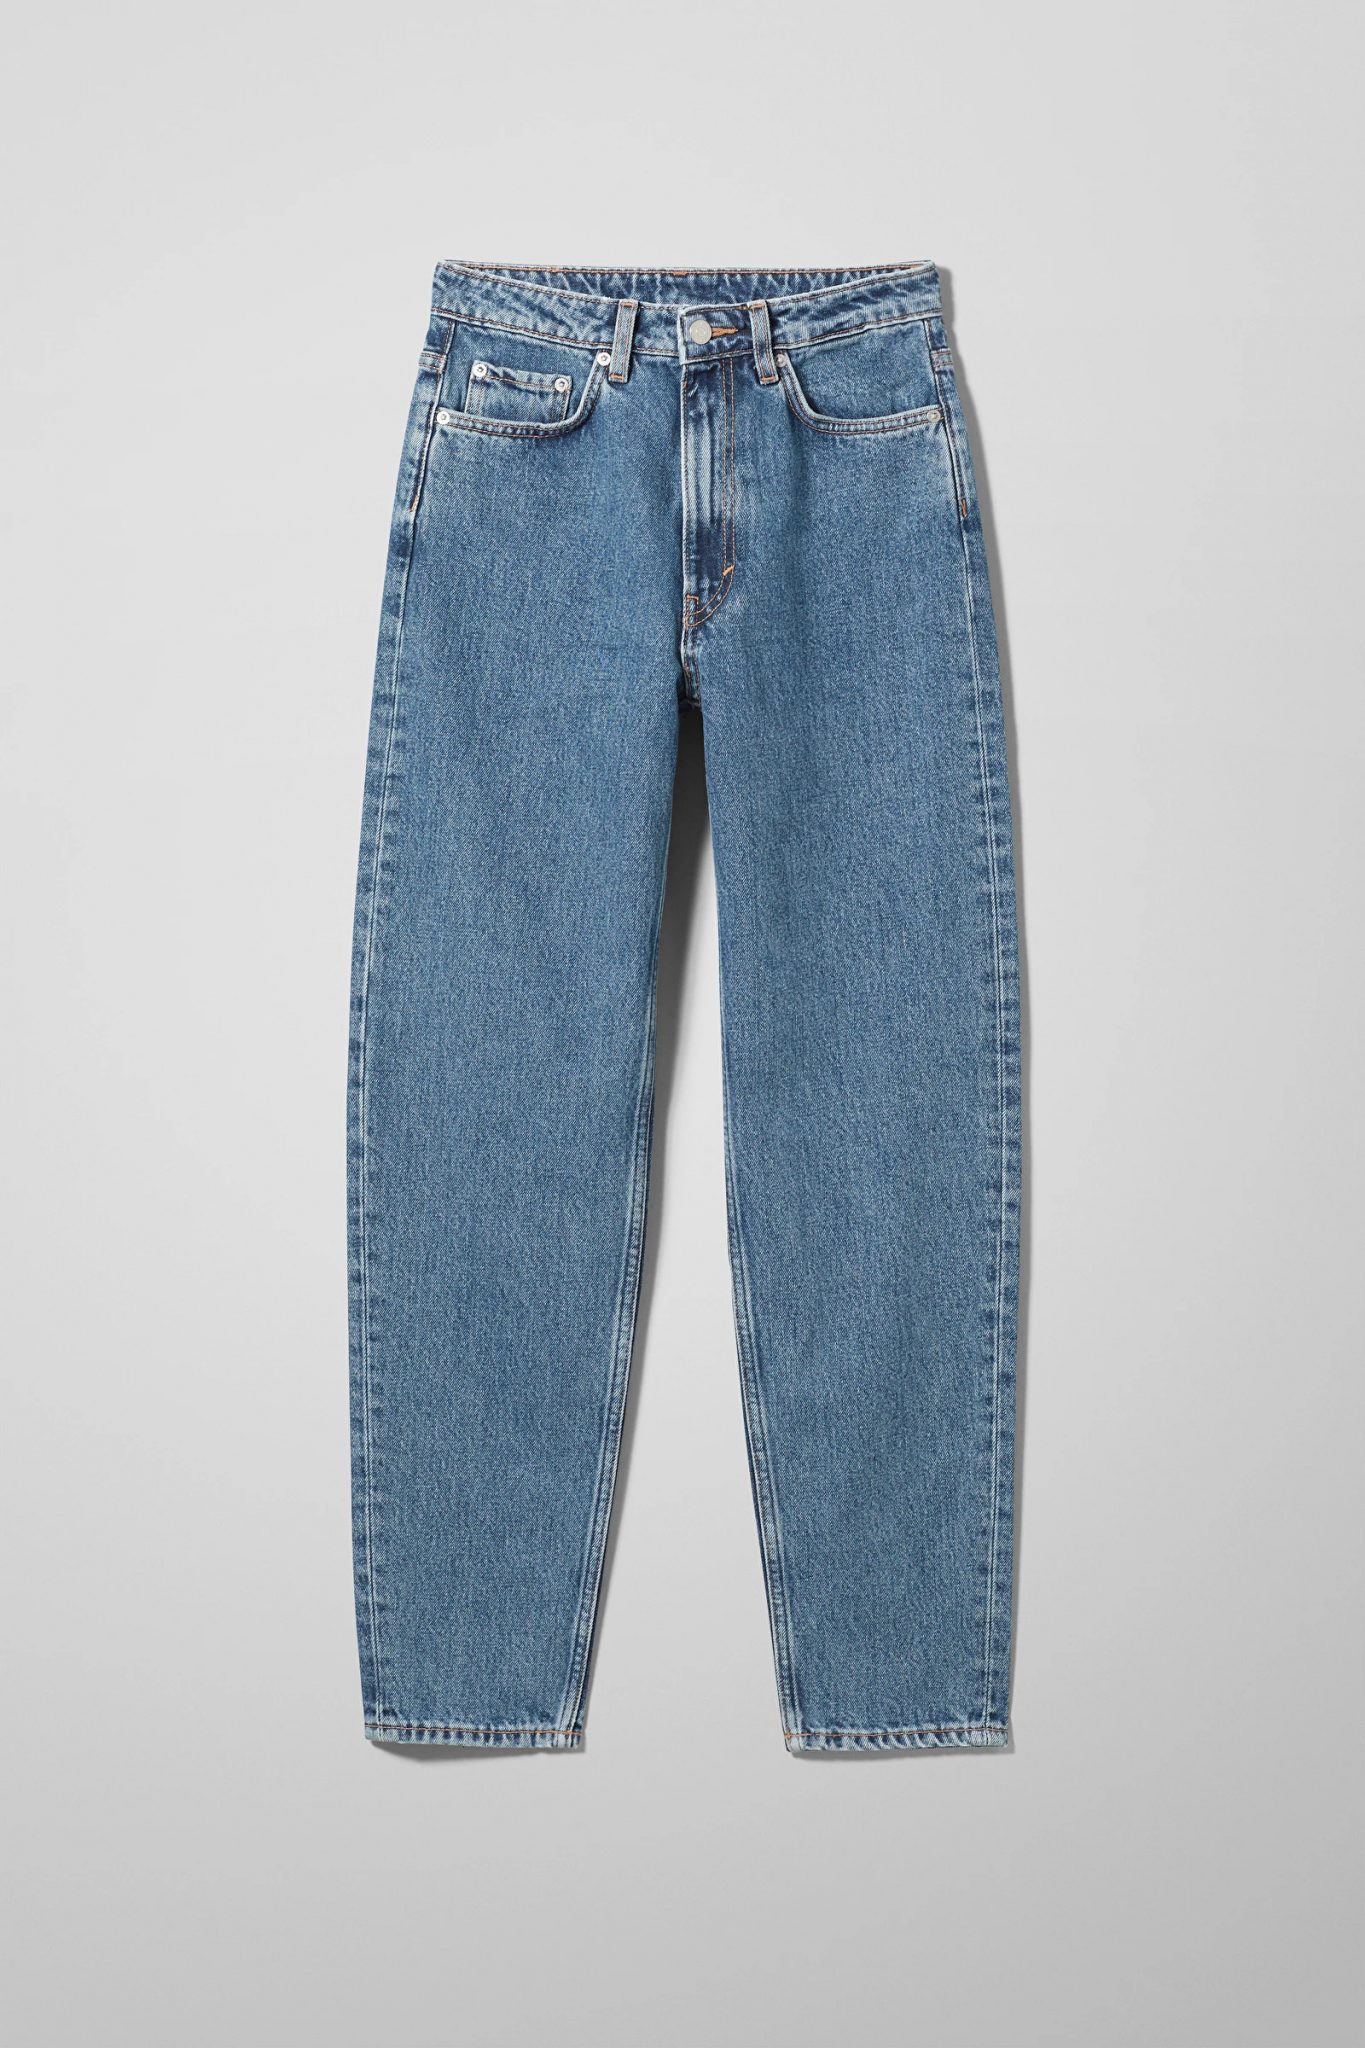 tapered style jeans